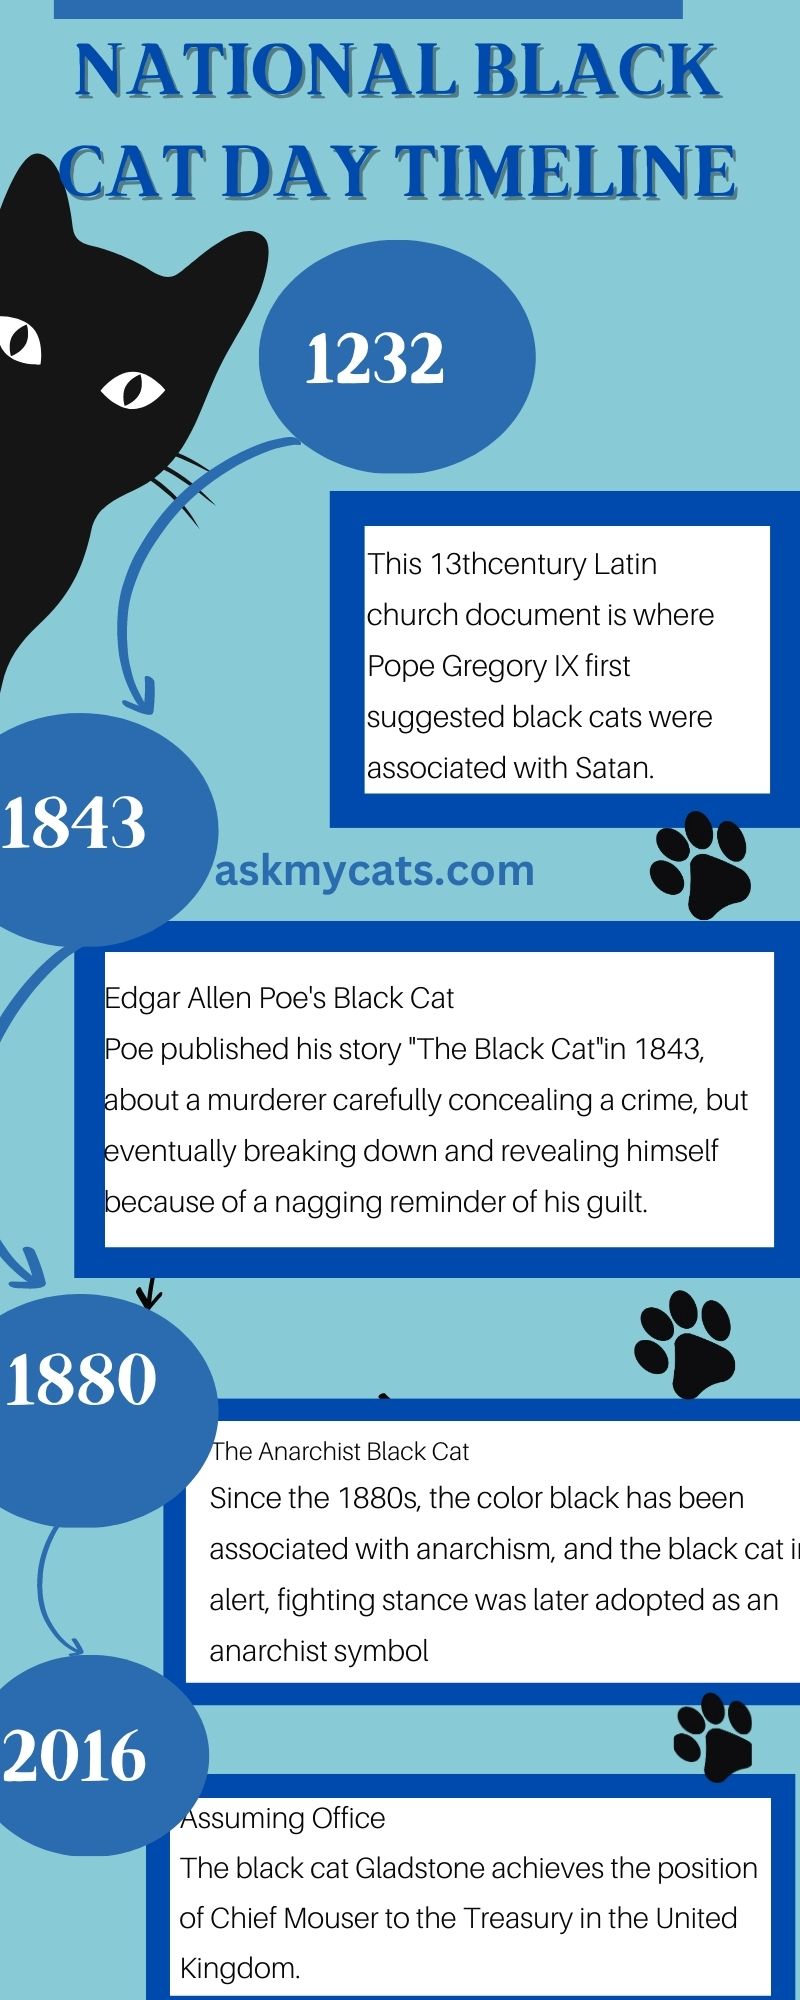 NATIONAL BLACK CAT DAY TIMELINE (Infographic)